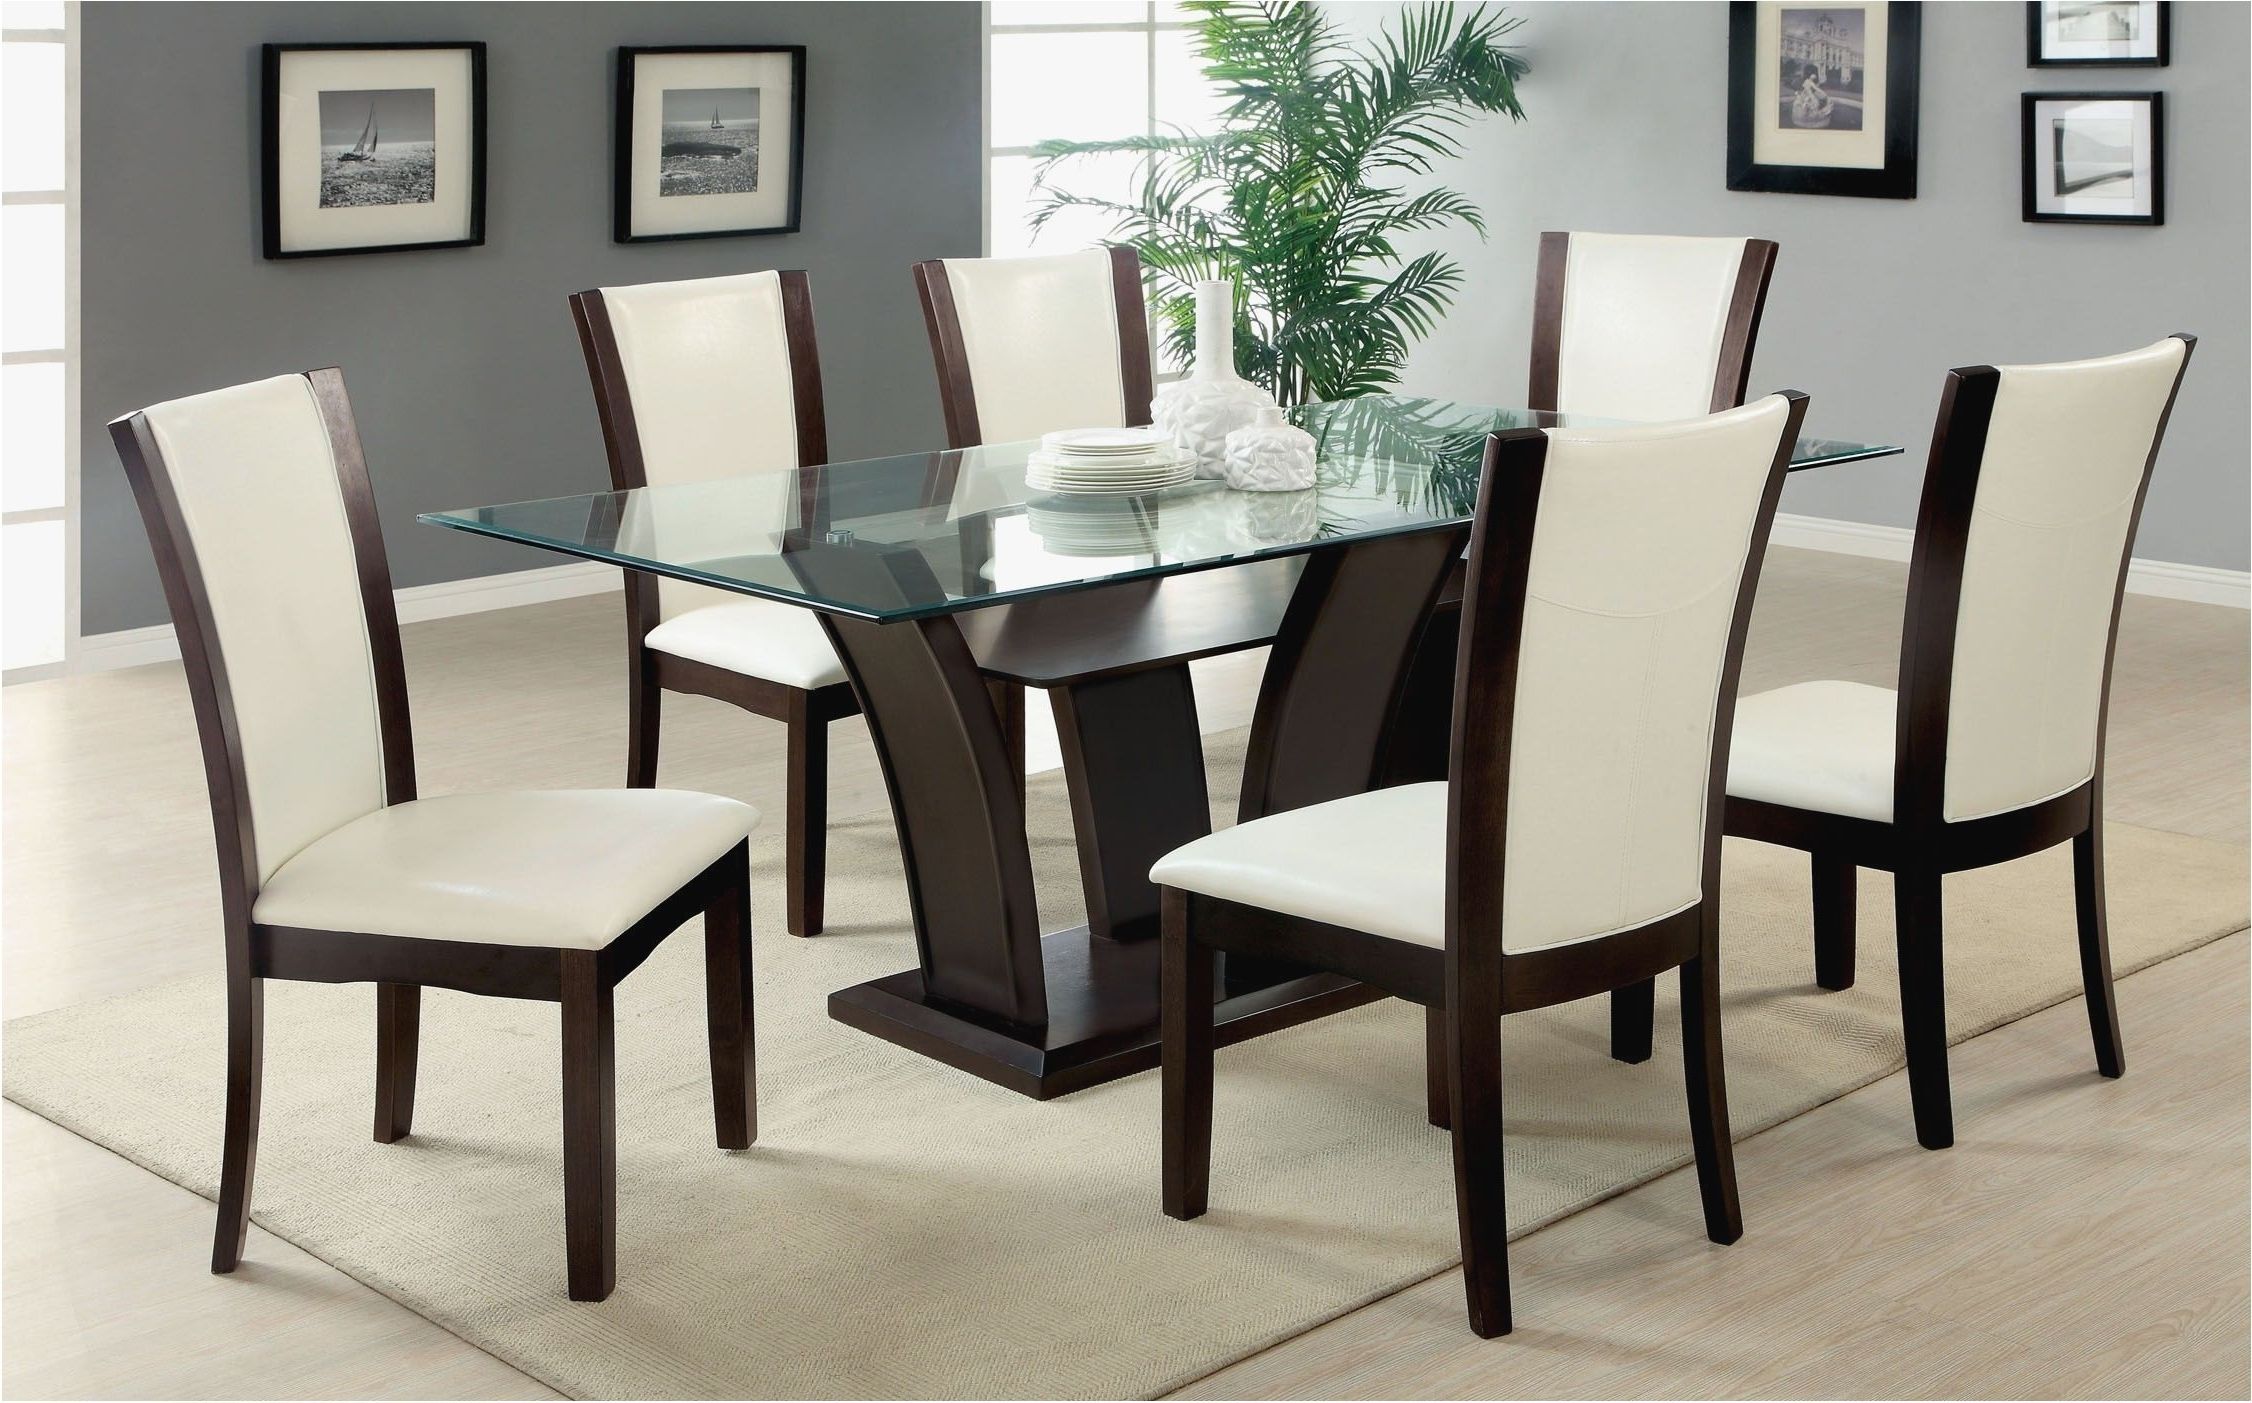 Spectacular 6 Chair Dining Table Inspiration 2018 Dining Table Set 6 Pertaining To 2017 6 Chair Dining Table Sets (Photo 1 of 25)